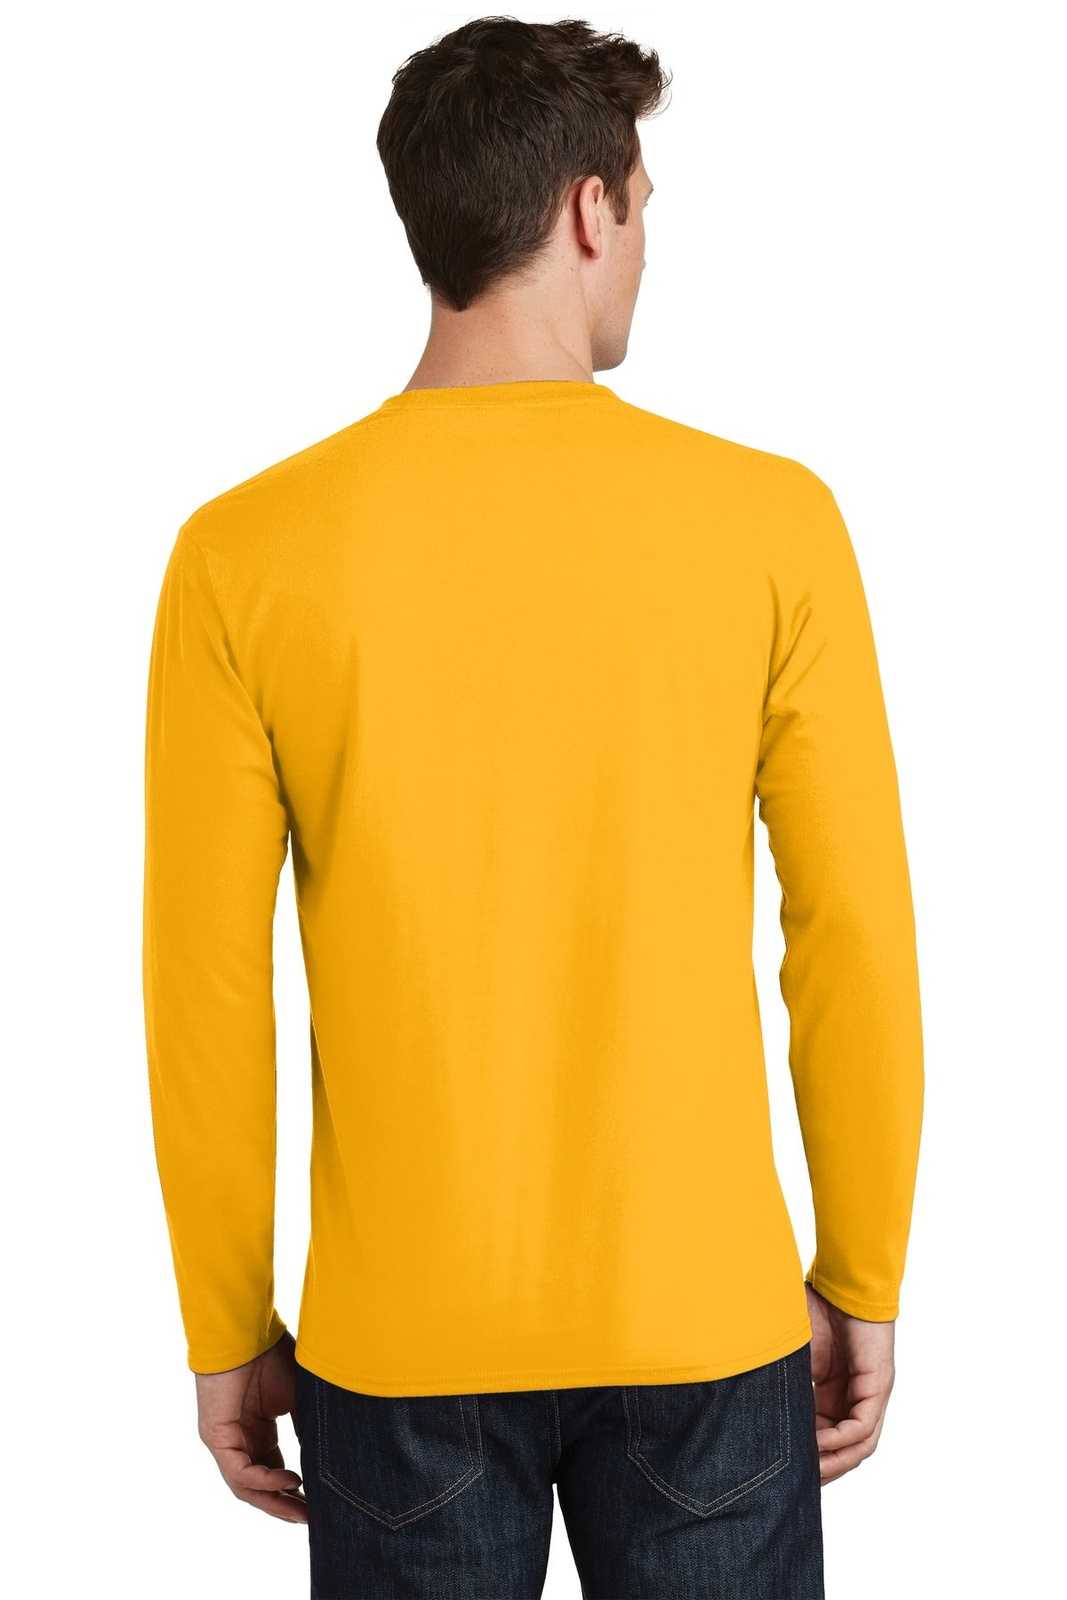 Port & Company PC450LS Long Sleeve Fan Favorite Tee - Bright Gold - HIT a Double - 1